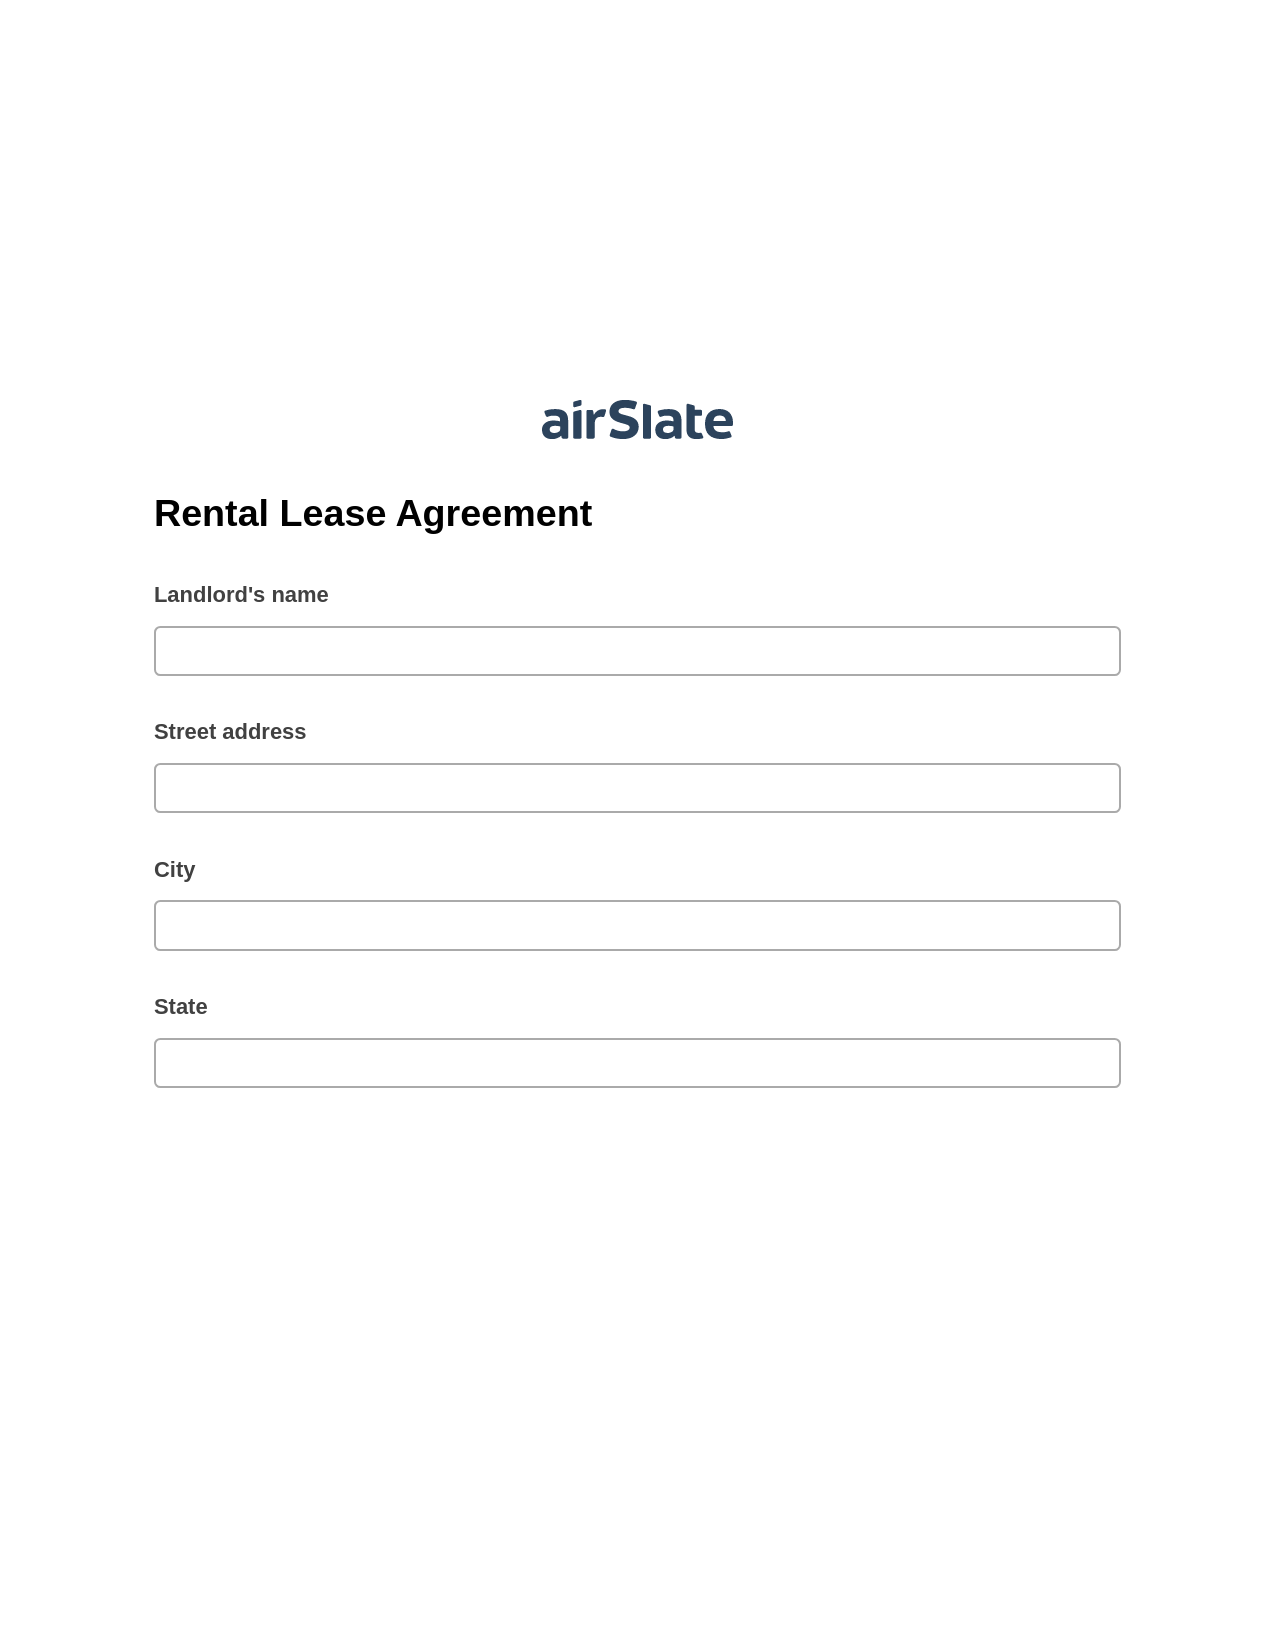 Multirole Rental Lease Agreement Pre-fill from CSV File Dropdown Options Bot, Remove Tags From Slate Bot, Export to Formstack Documents Bot